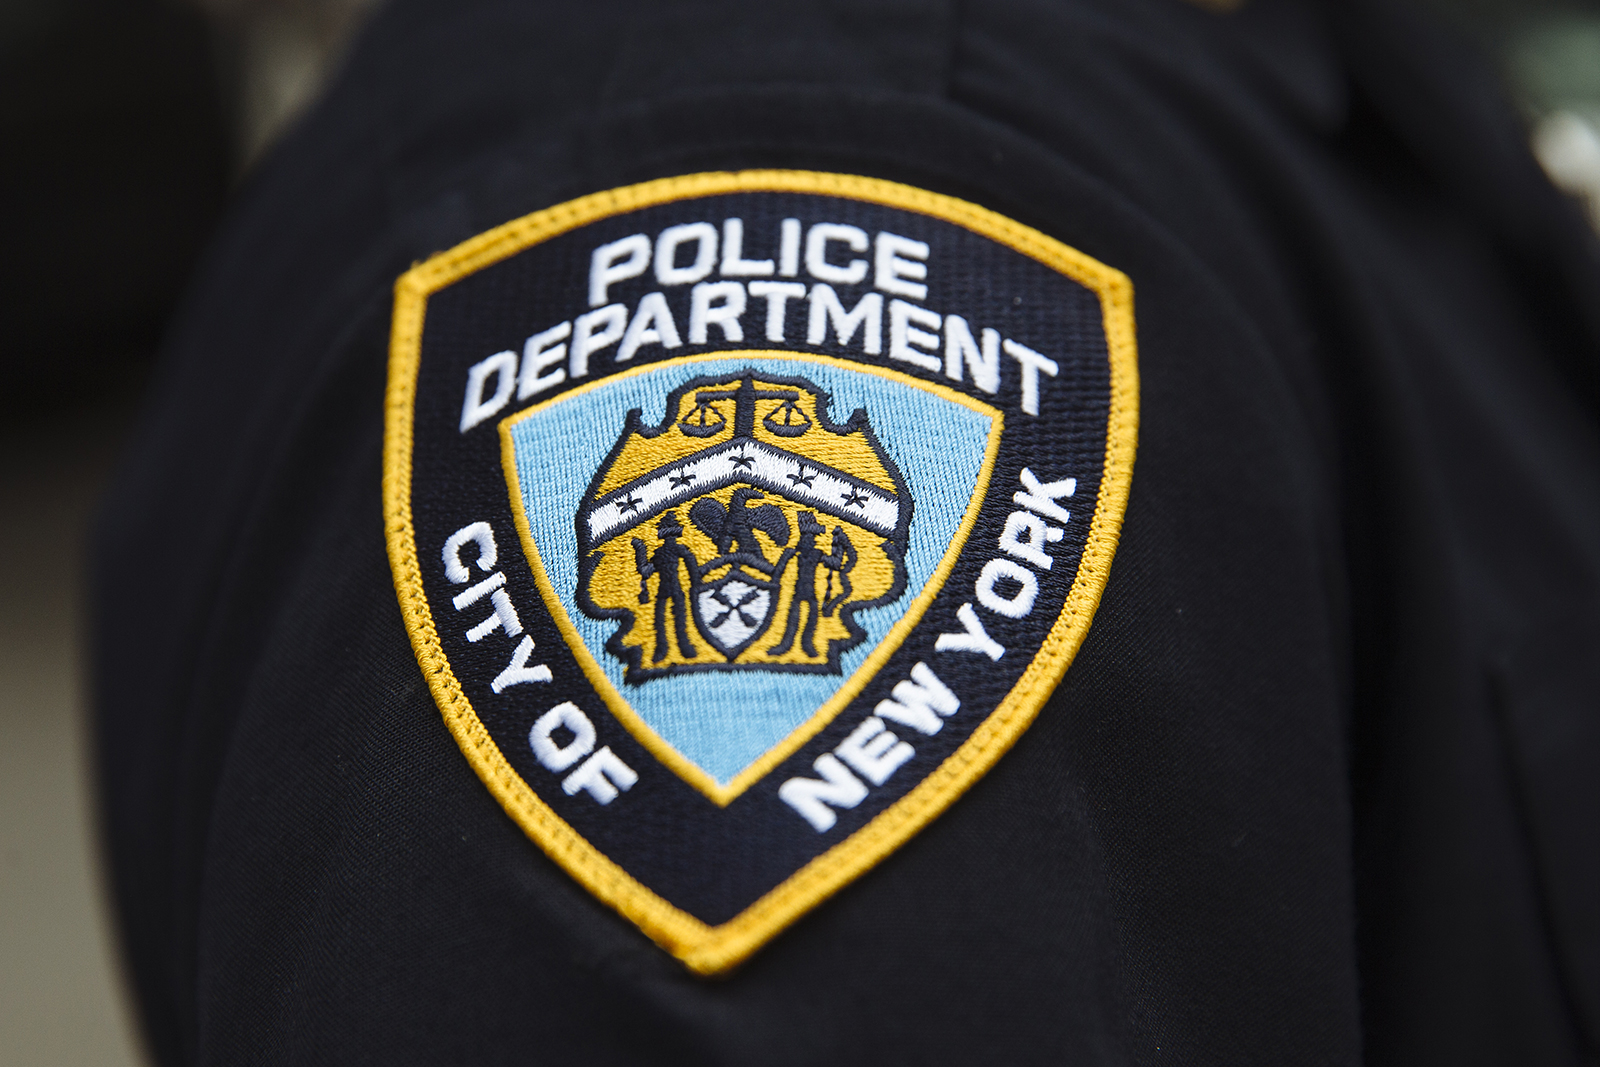 A New York City Police Department (NYPD) patch is seen on an officer's uniform.